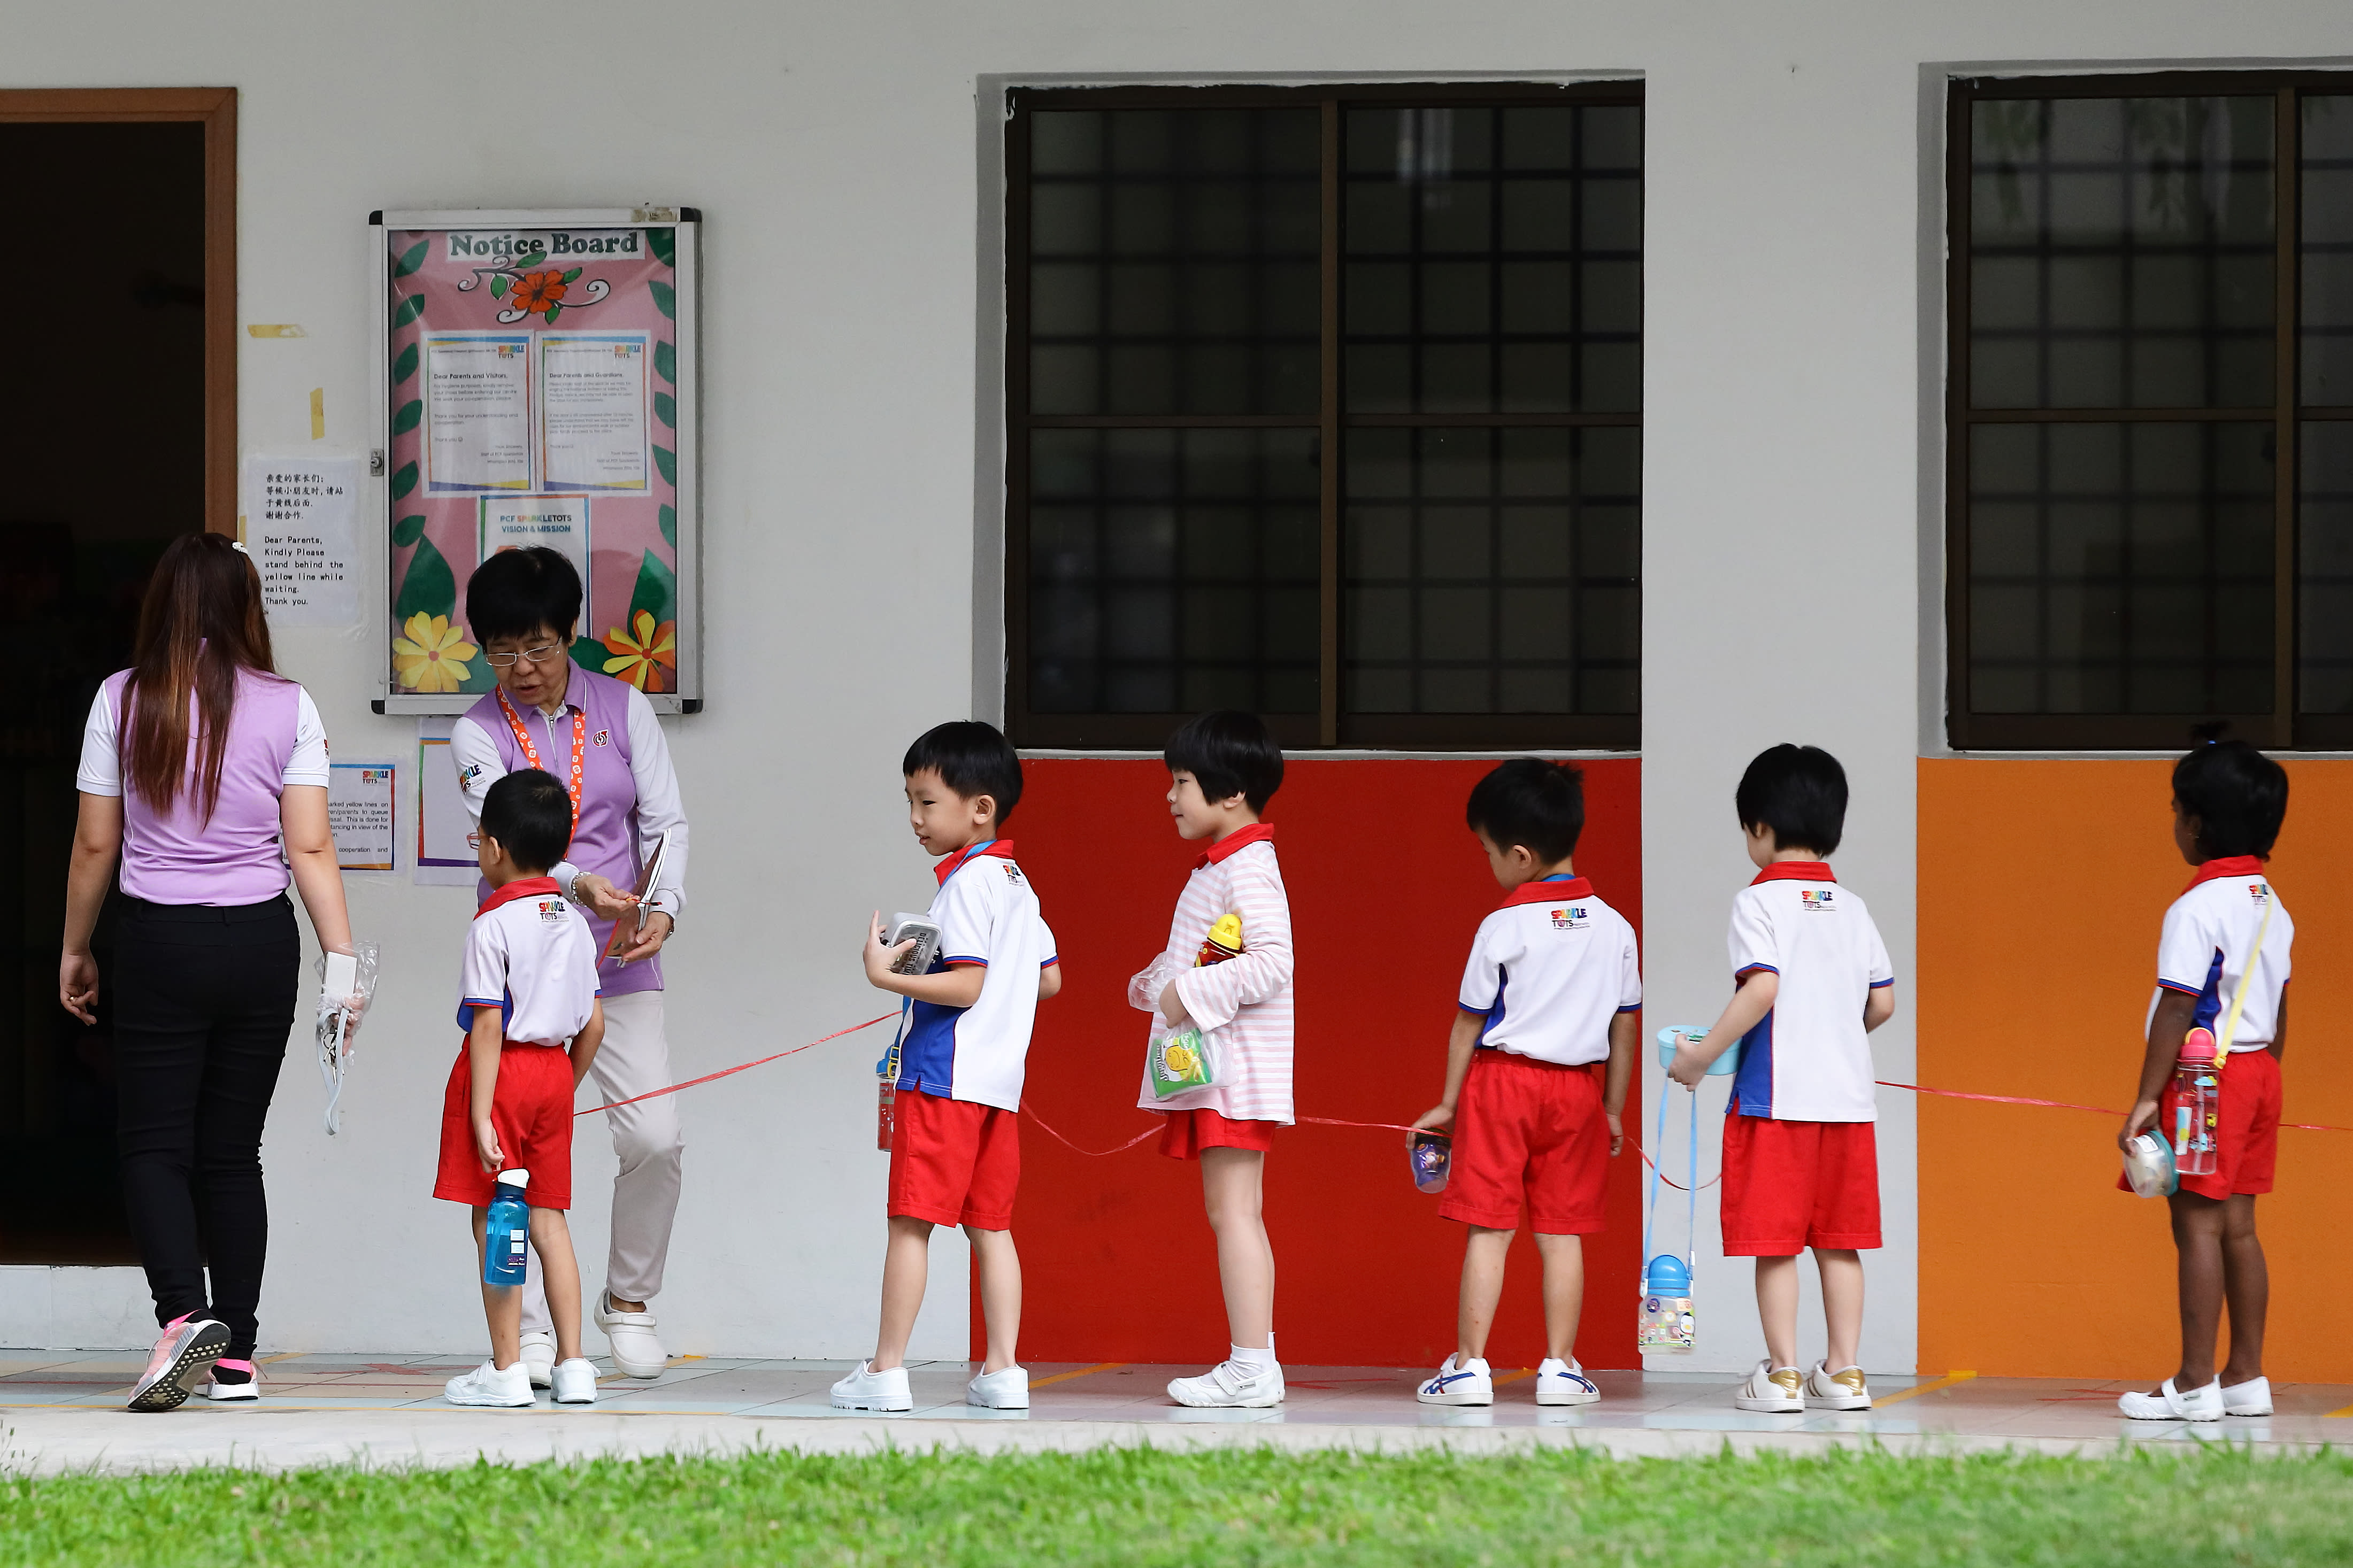 Singapore pre-school staff to be tested for COVID-19 before centres reopen: report